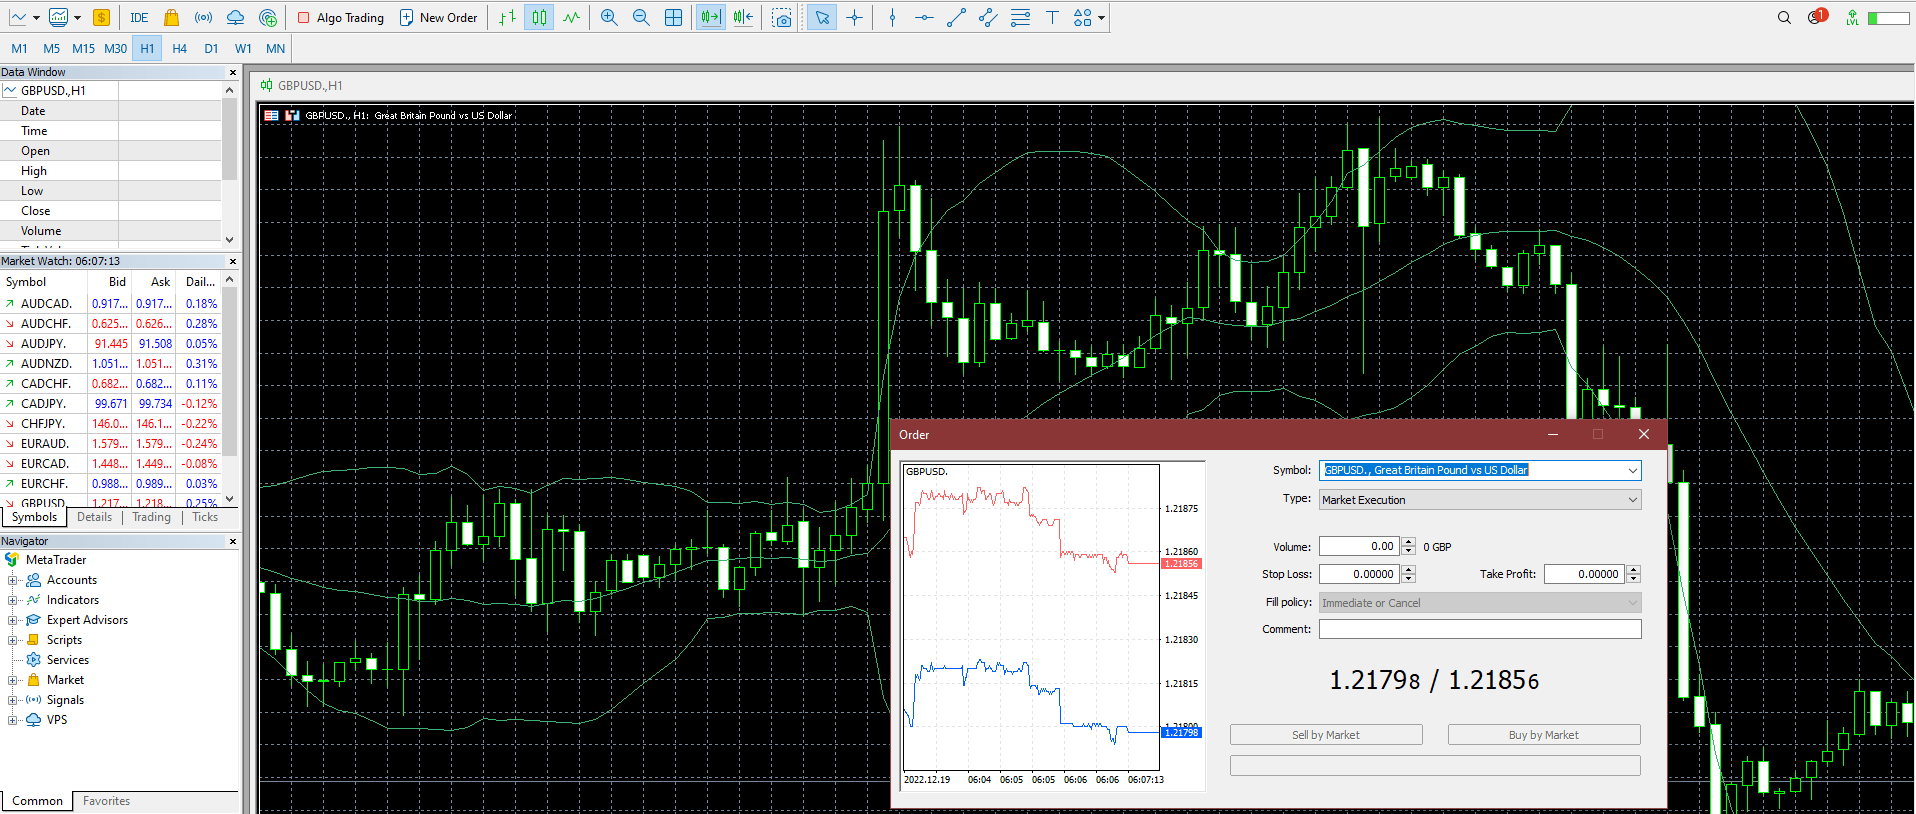 Trade a range of CFDs and forex pairs on MT4 with LonghornFX